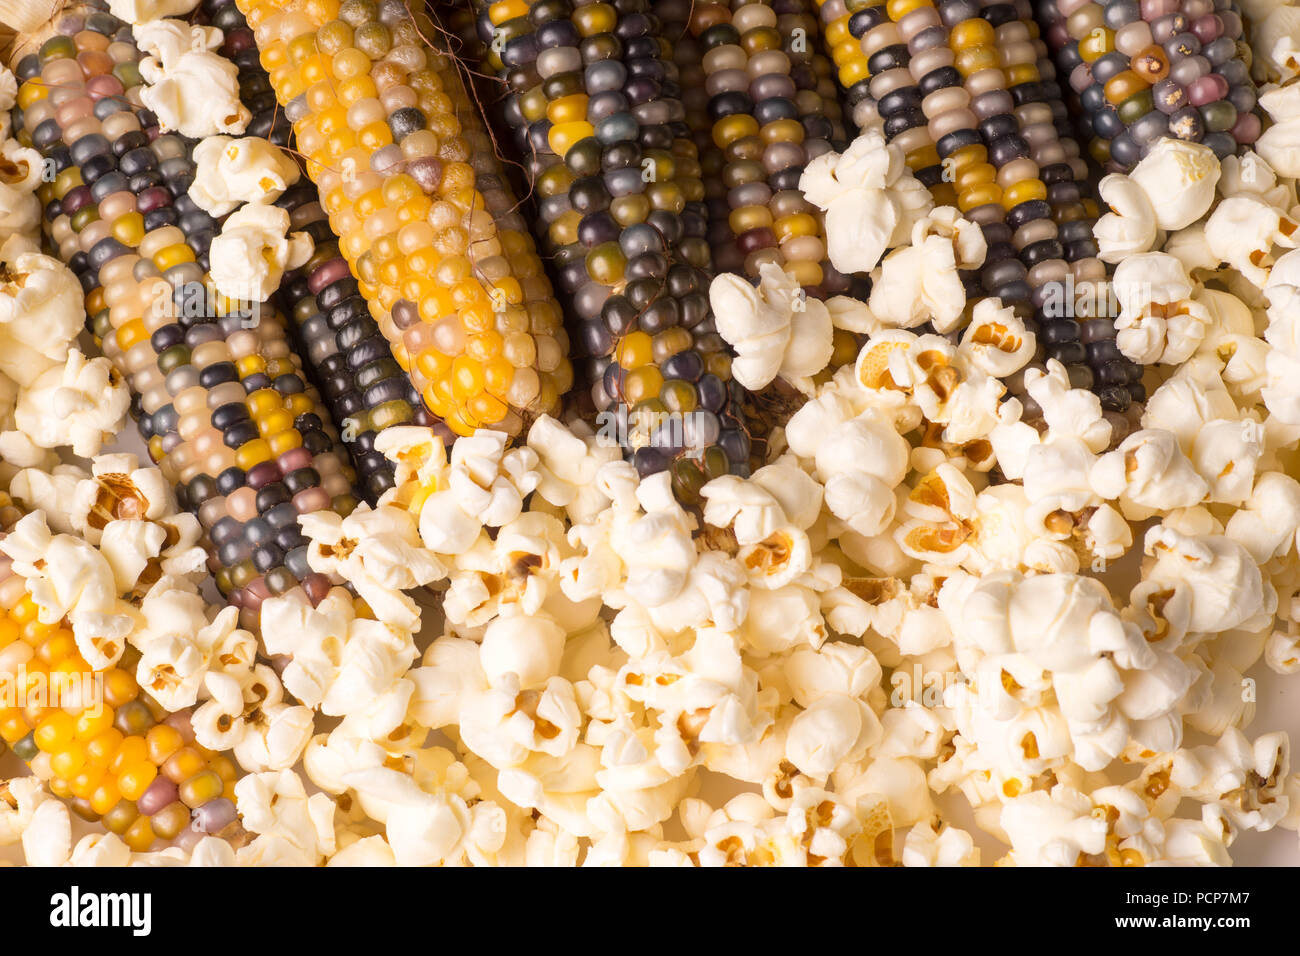 bunch of organic dried multicolored corn on the cob ready to pop popcorn or make grit with already popped popcorn Stock Photo